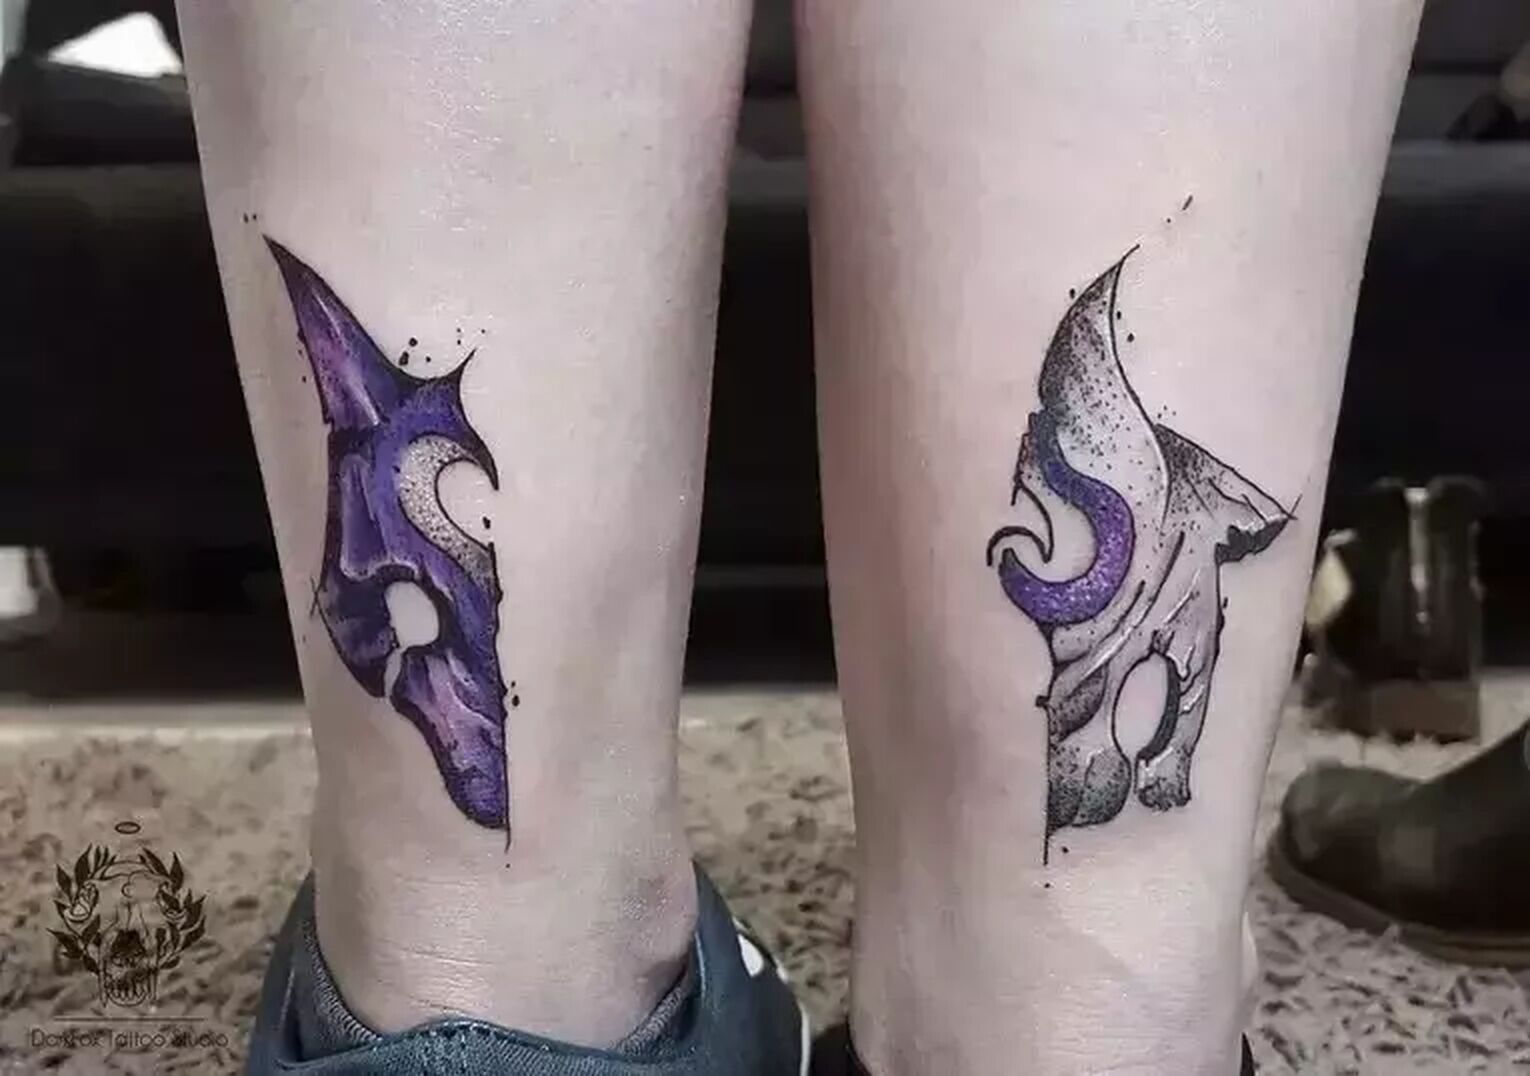 Kindred’s Mask Tattoo